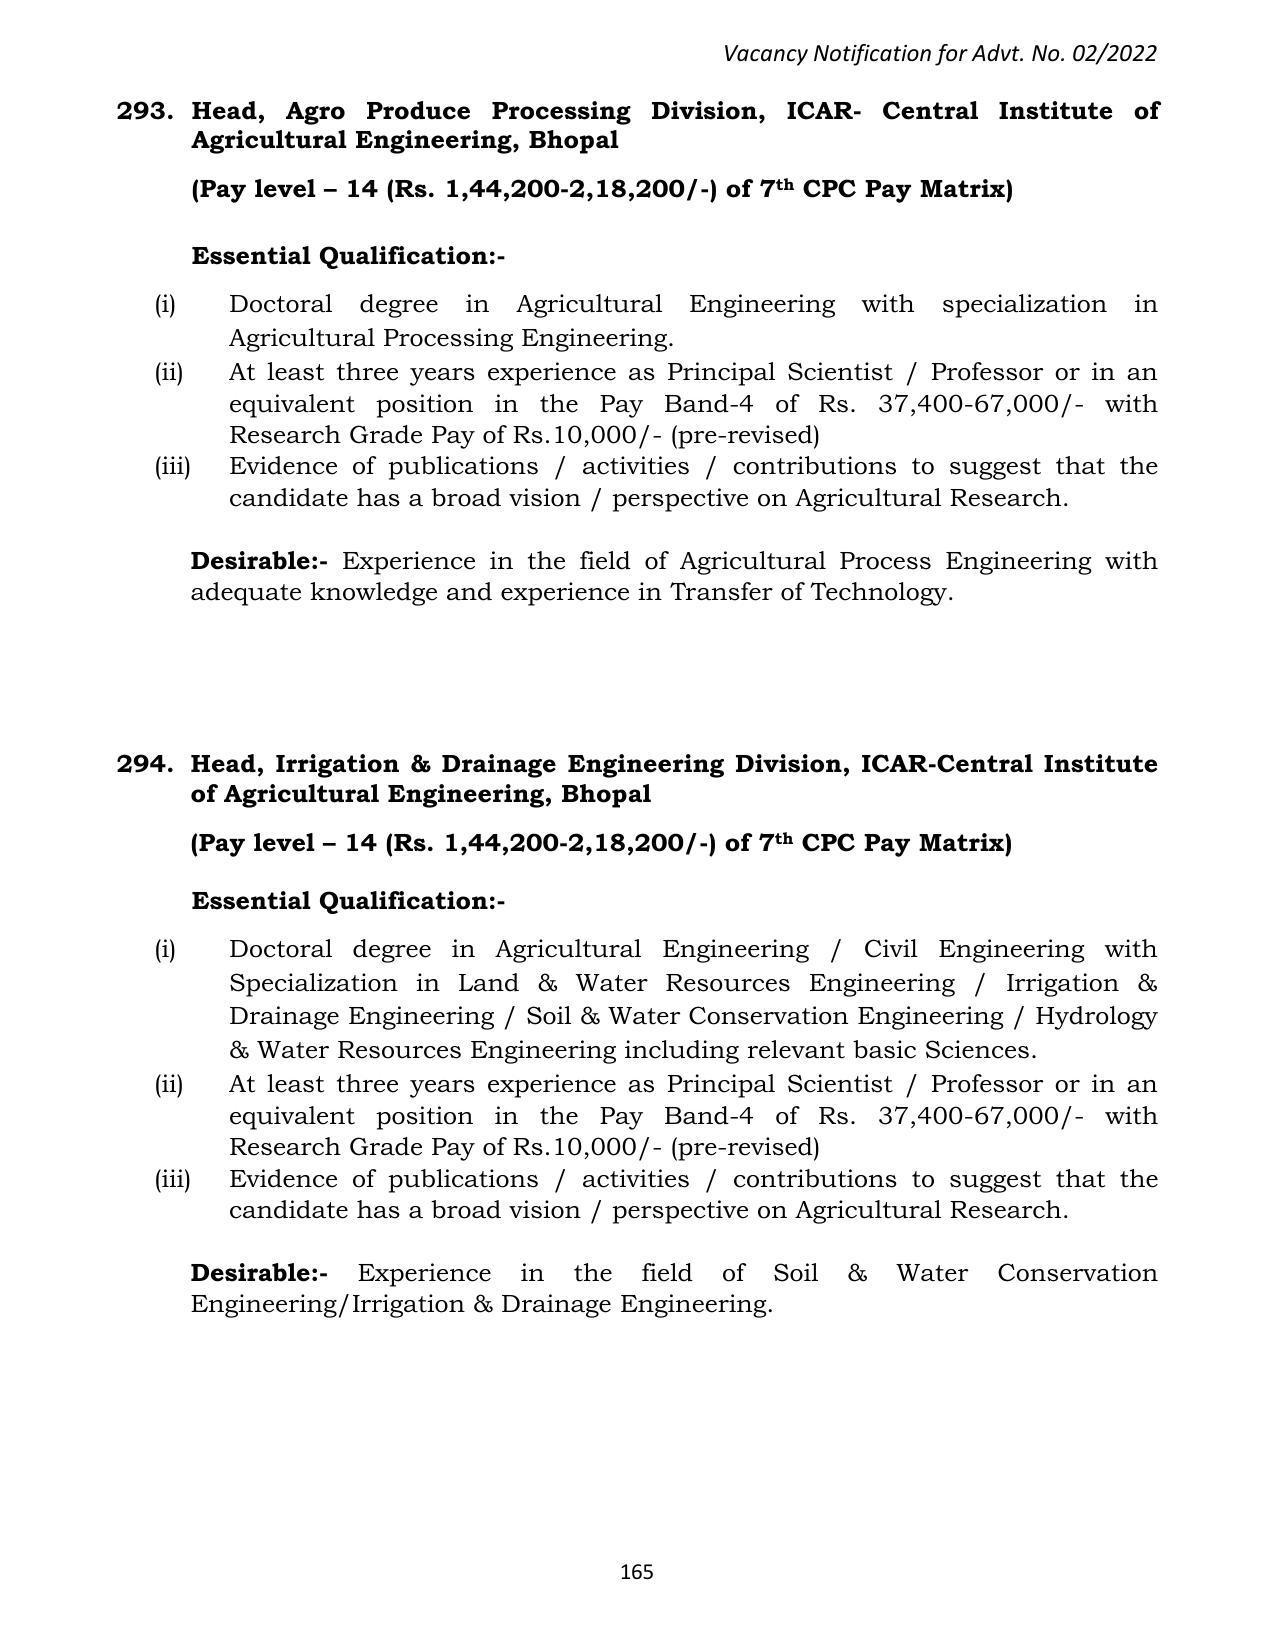 ASRB Non-Research Management Recruitment 2022 - Page 80